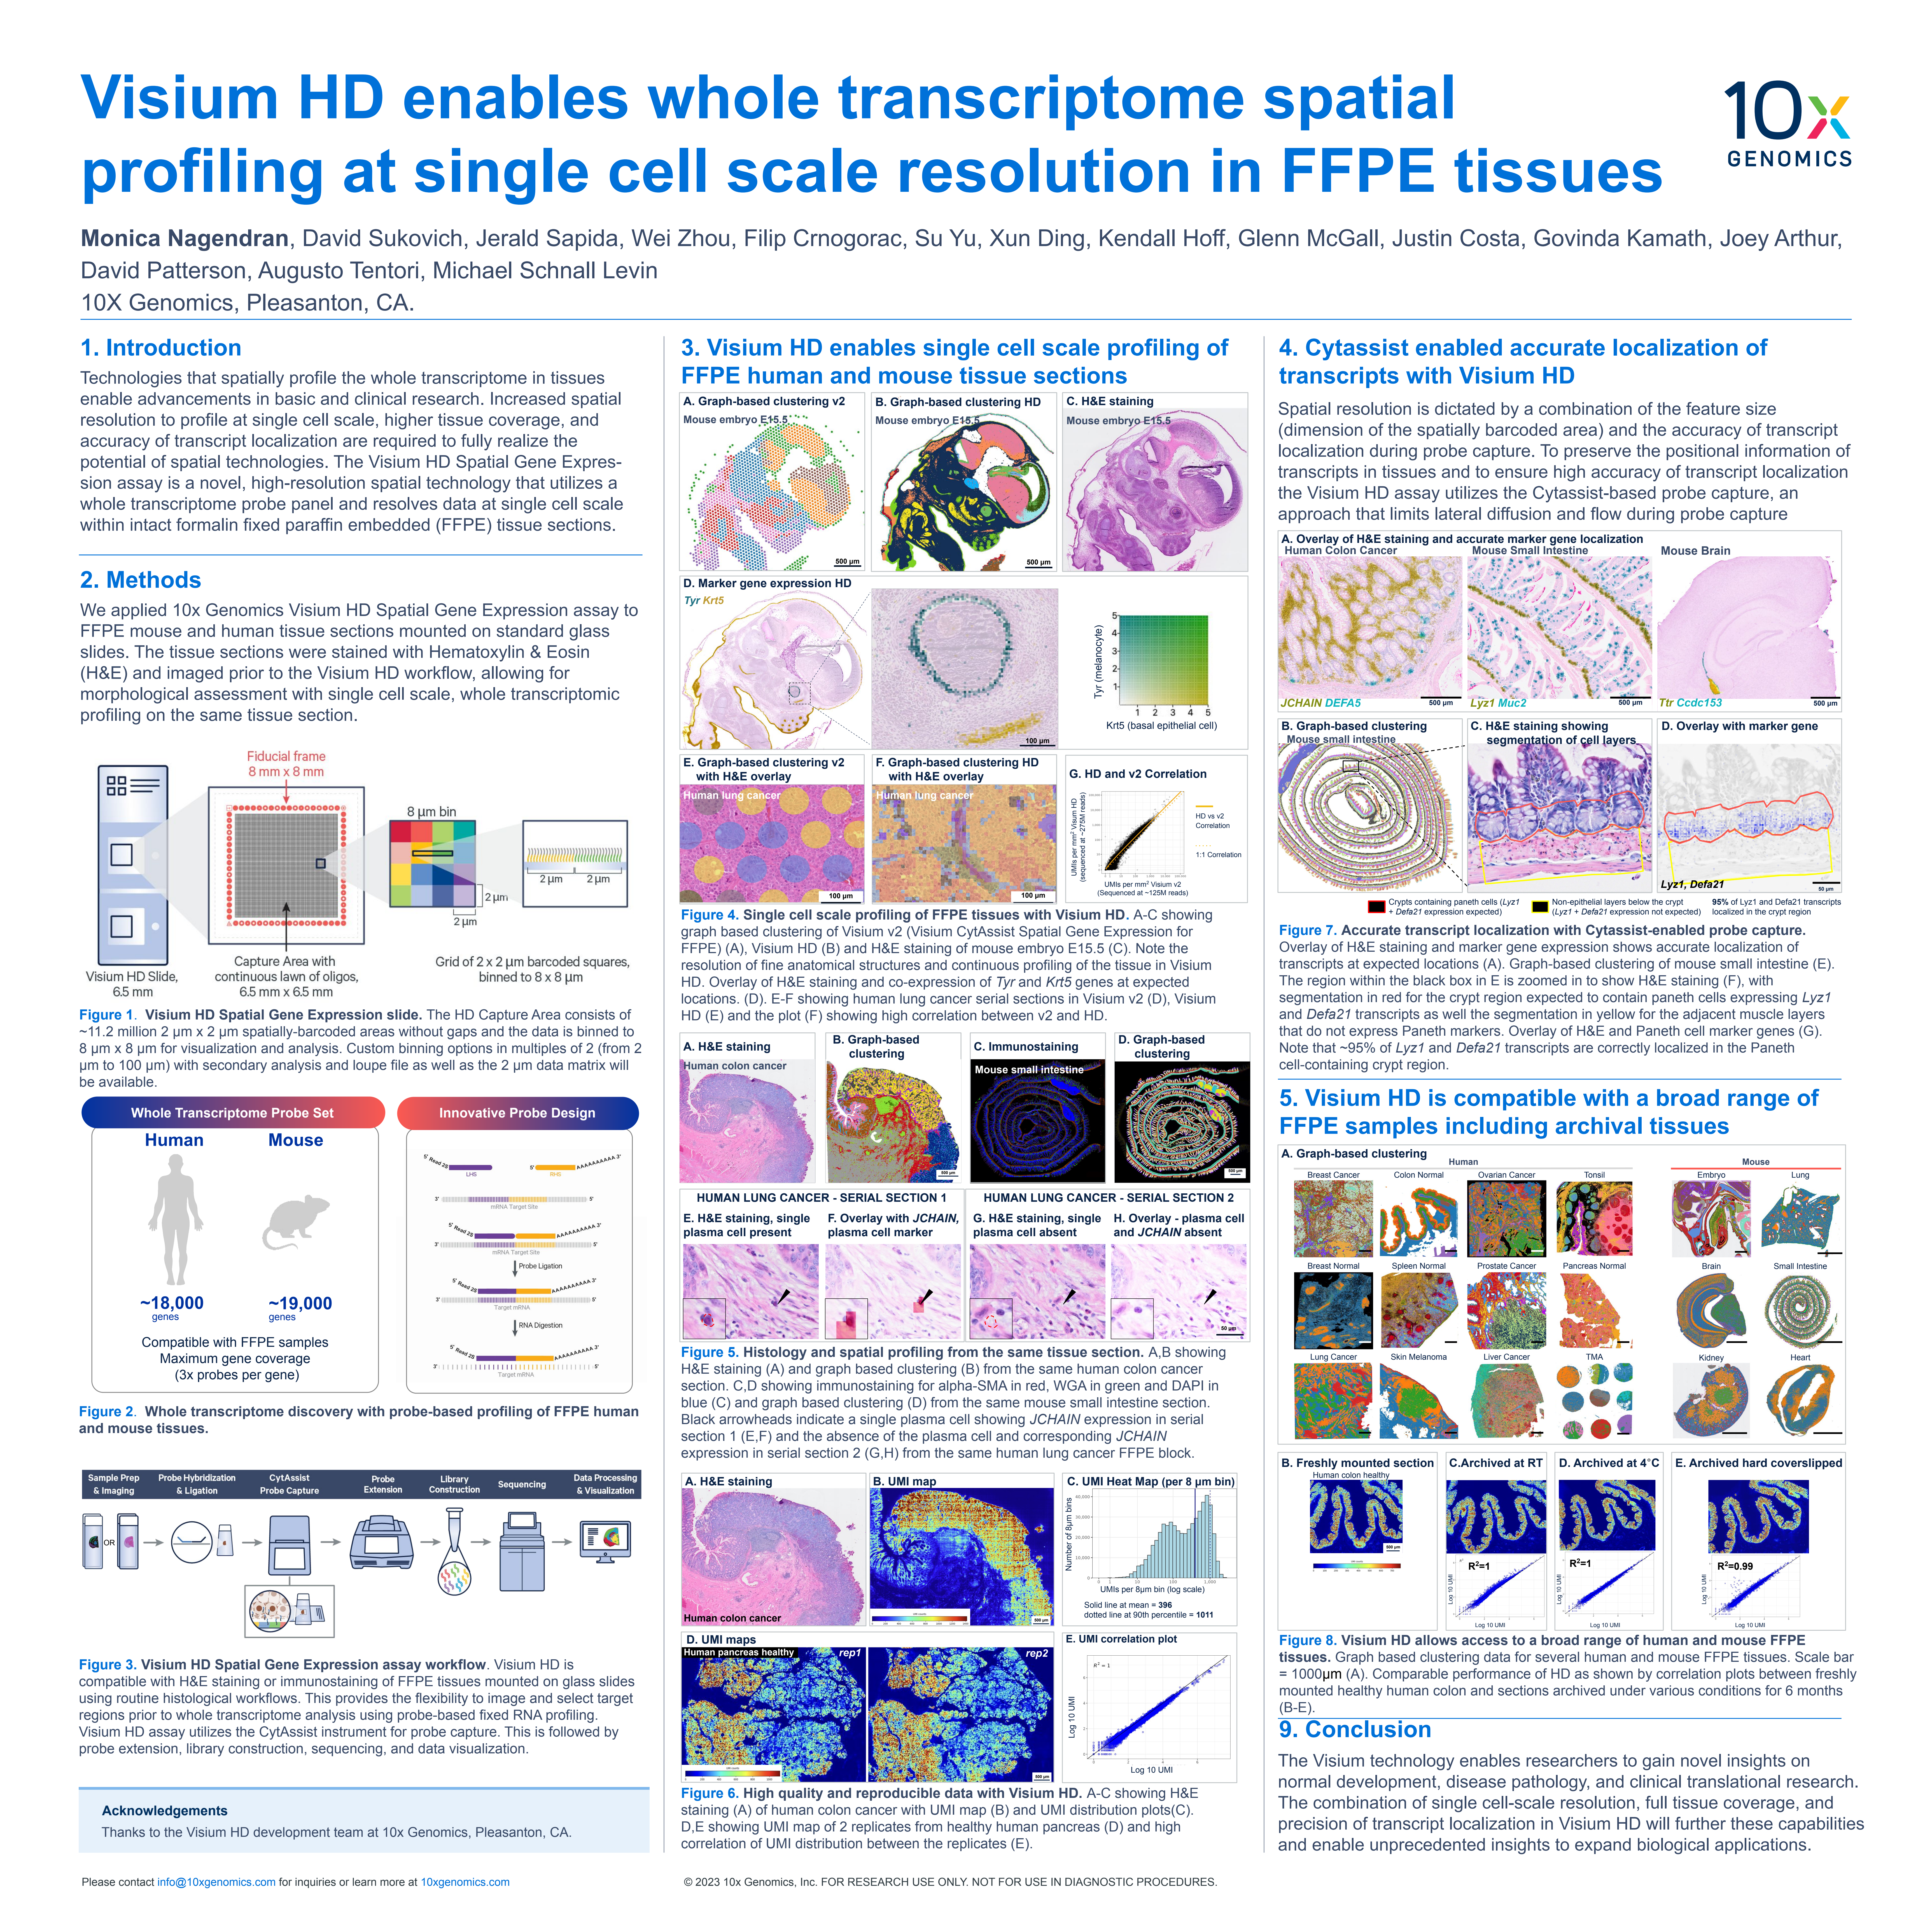 Visium HD enables whole transcriptome spatial profiling at single cell scale resolution in FFPE tissues